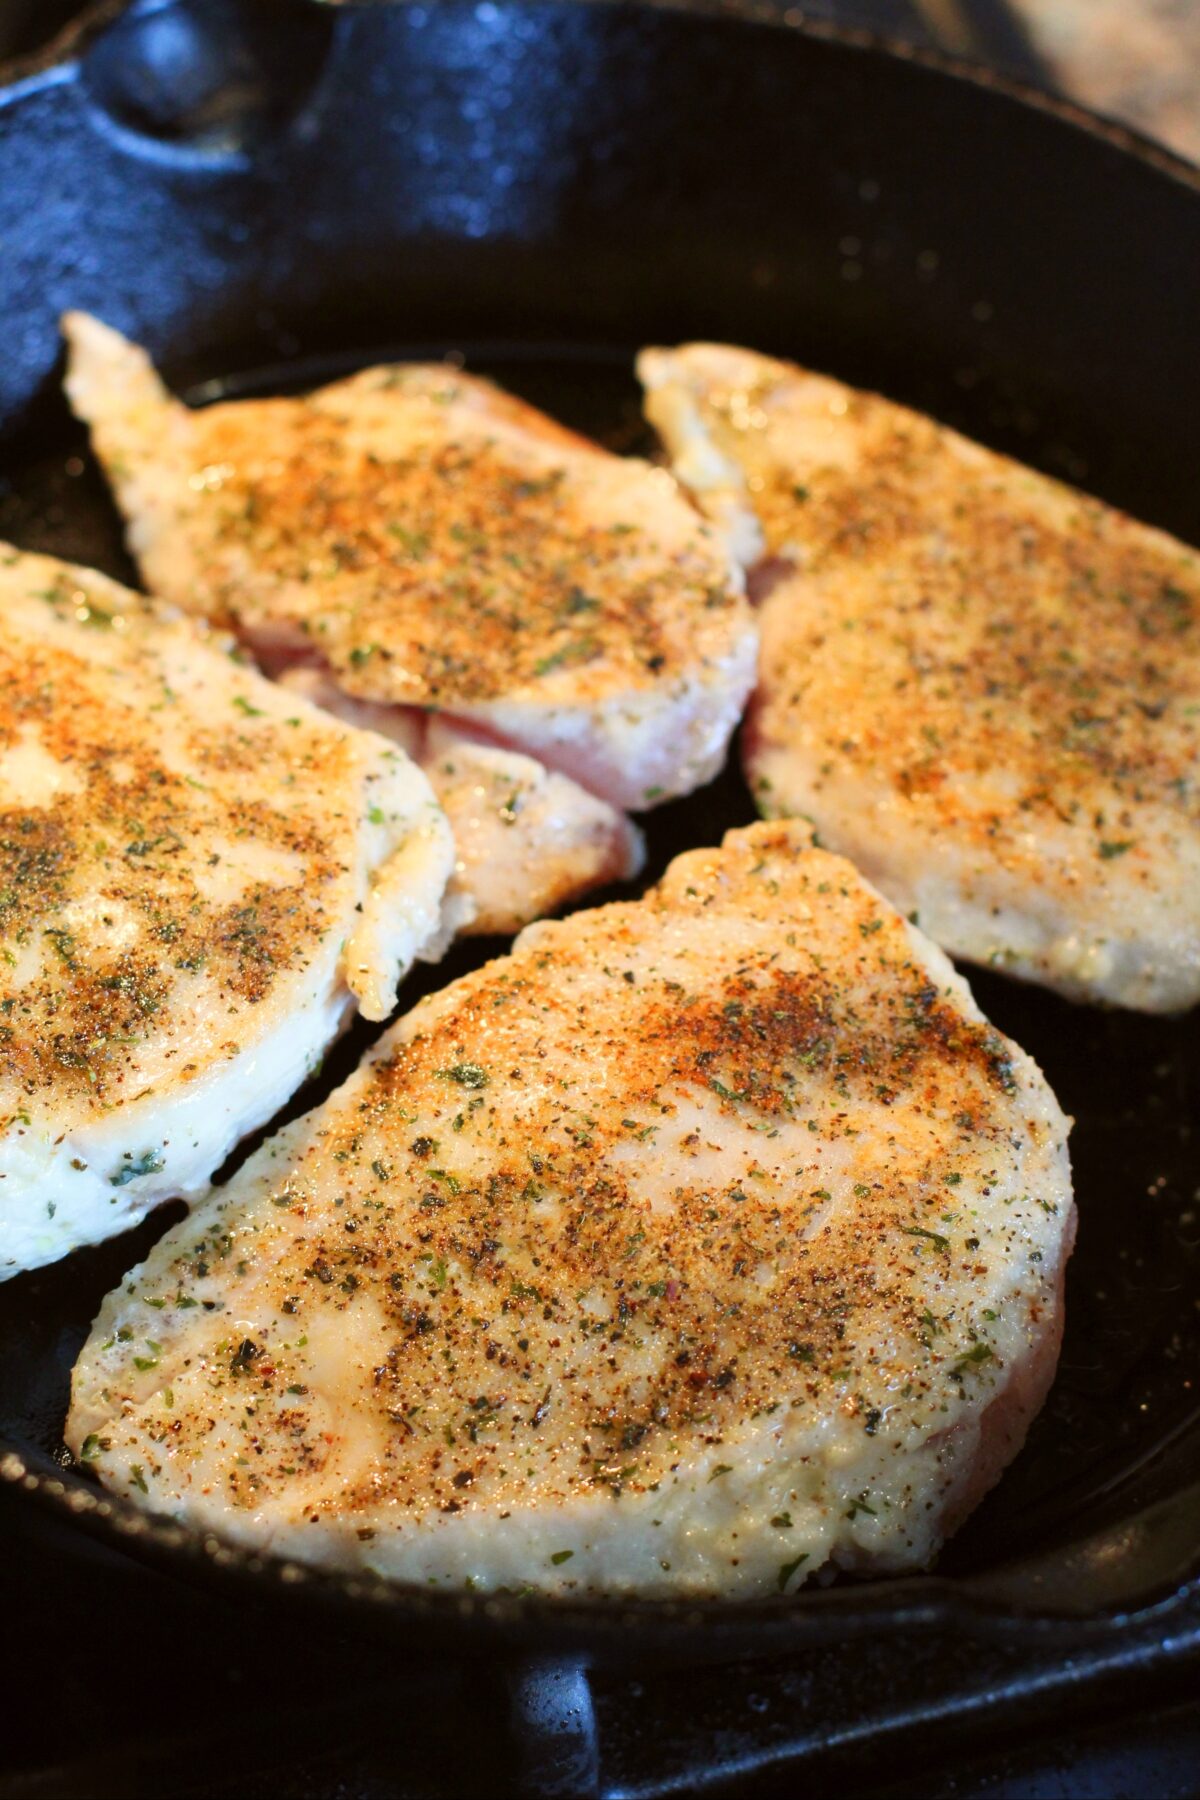 Chicken browning in the skillet.